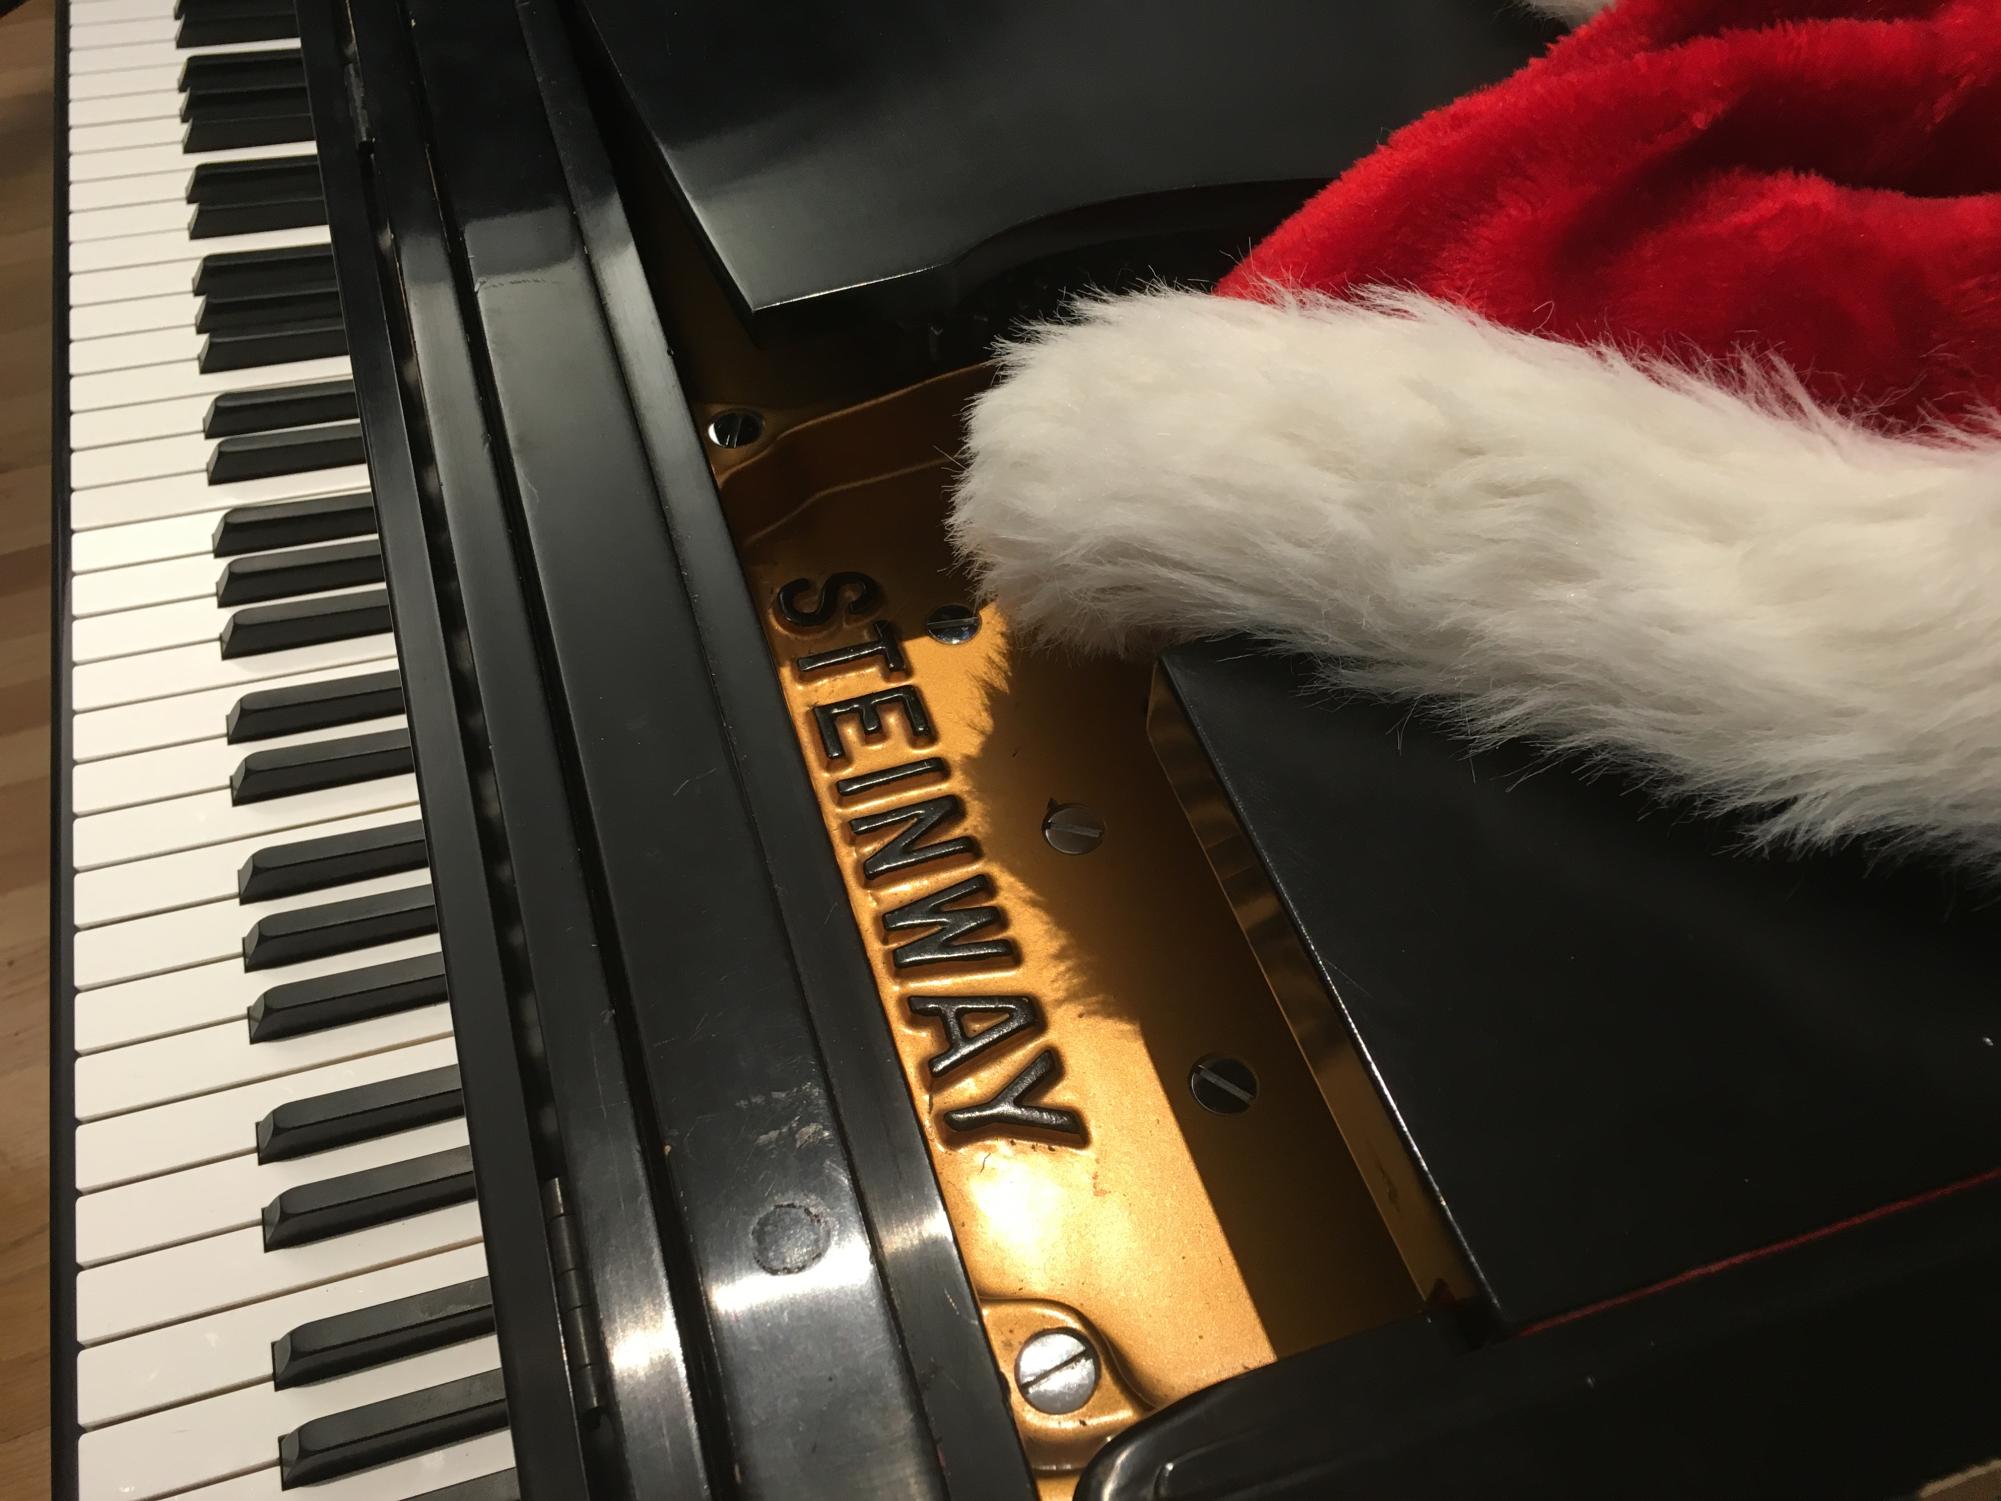 Christmas music readies its sinister influence.